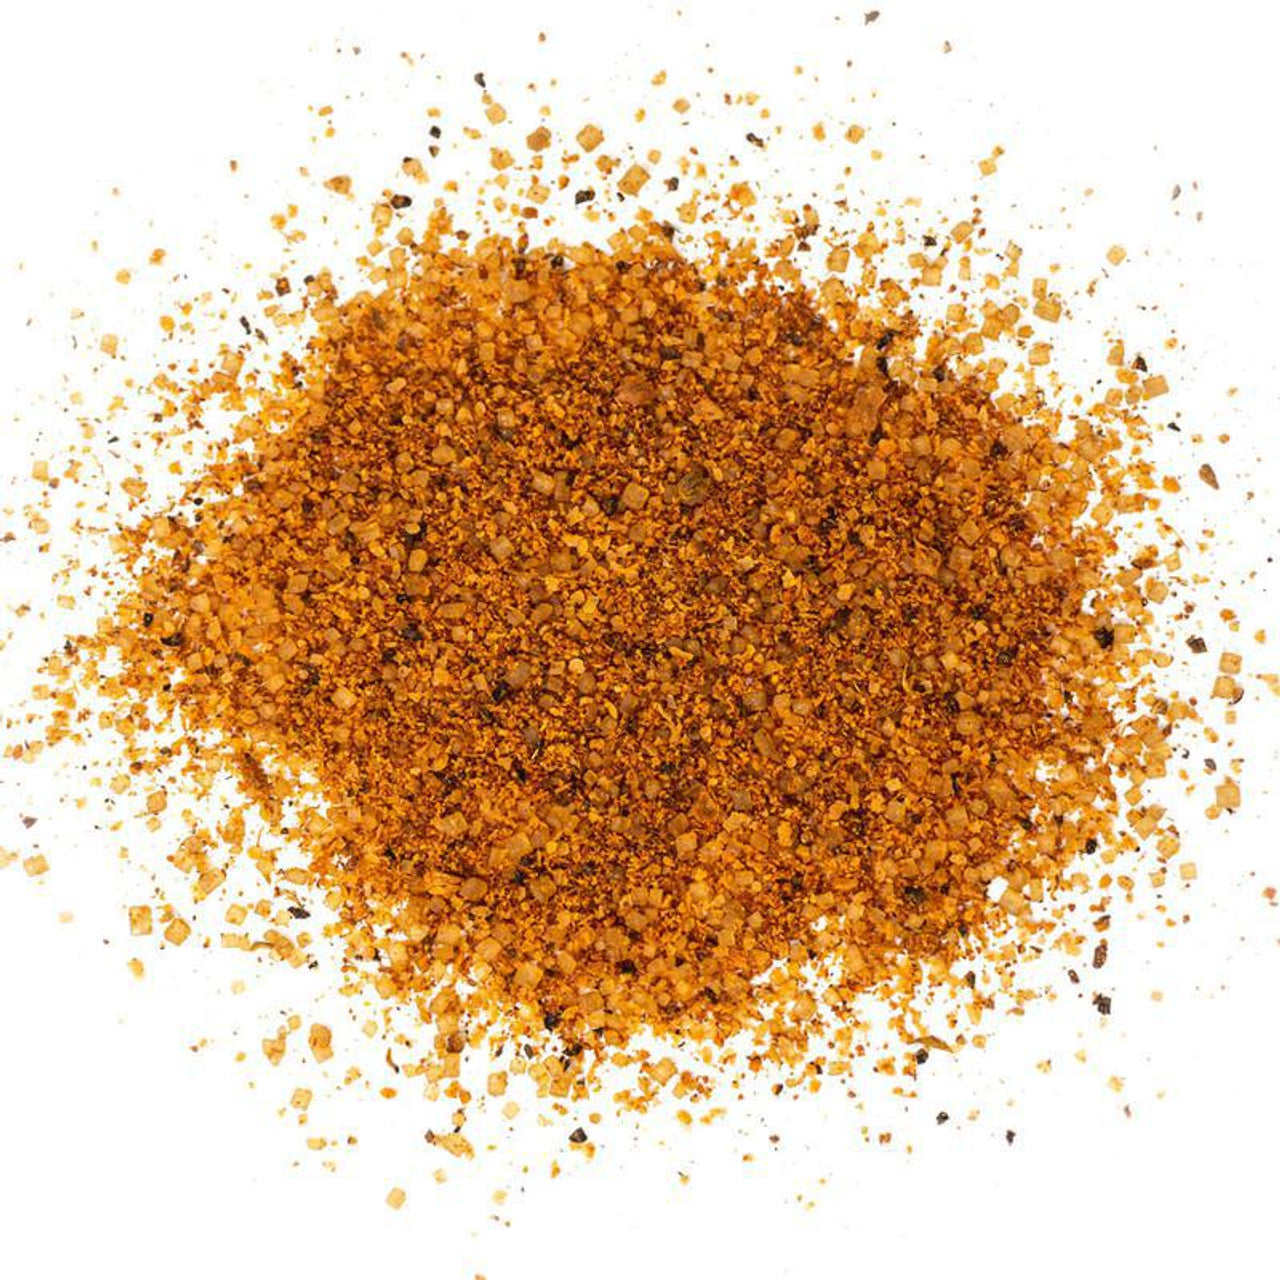 A close-up view of a pile of Tuffy Stone Classic BBQ Rub Sweet Heat seasoning, showcasing its coarse, orange-brown texture.